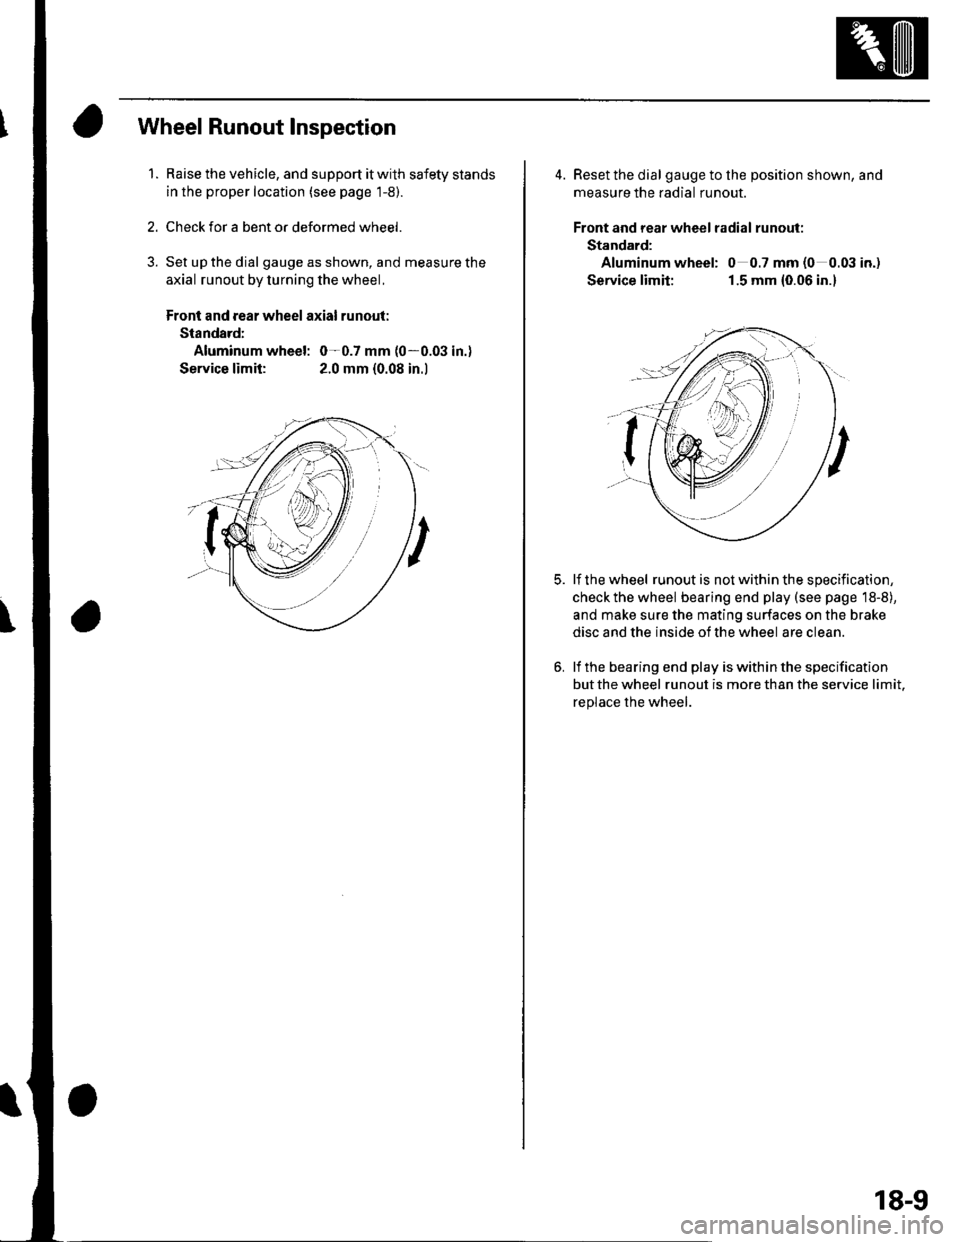 HONDA CIVIC 2002 7.G Service Manual Wheel Runout Inspection
1.Raise the vehicle, and support it with safety stands
in the proper location (see page 1-5,.
Check for a bent or deformed wheel.
Set up the dial gauge as shown, and measure th